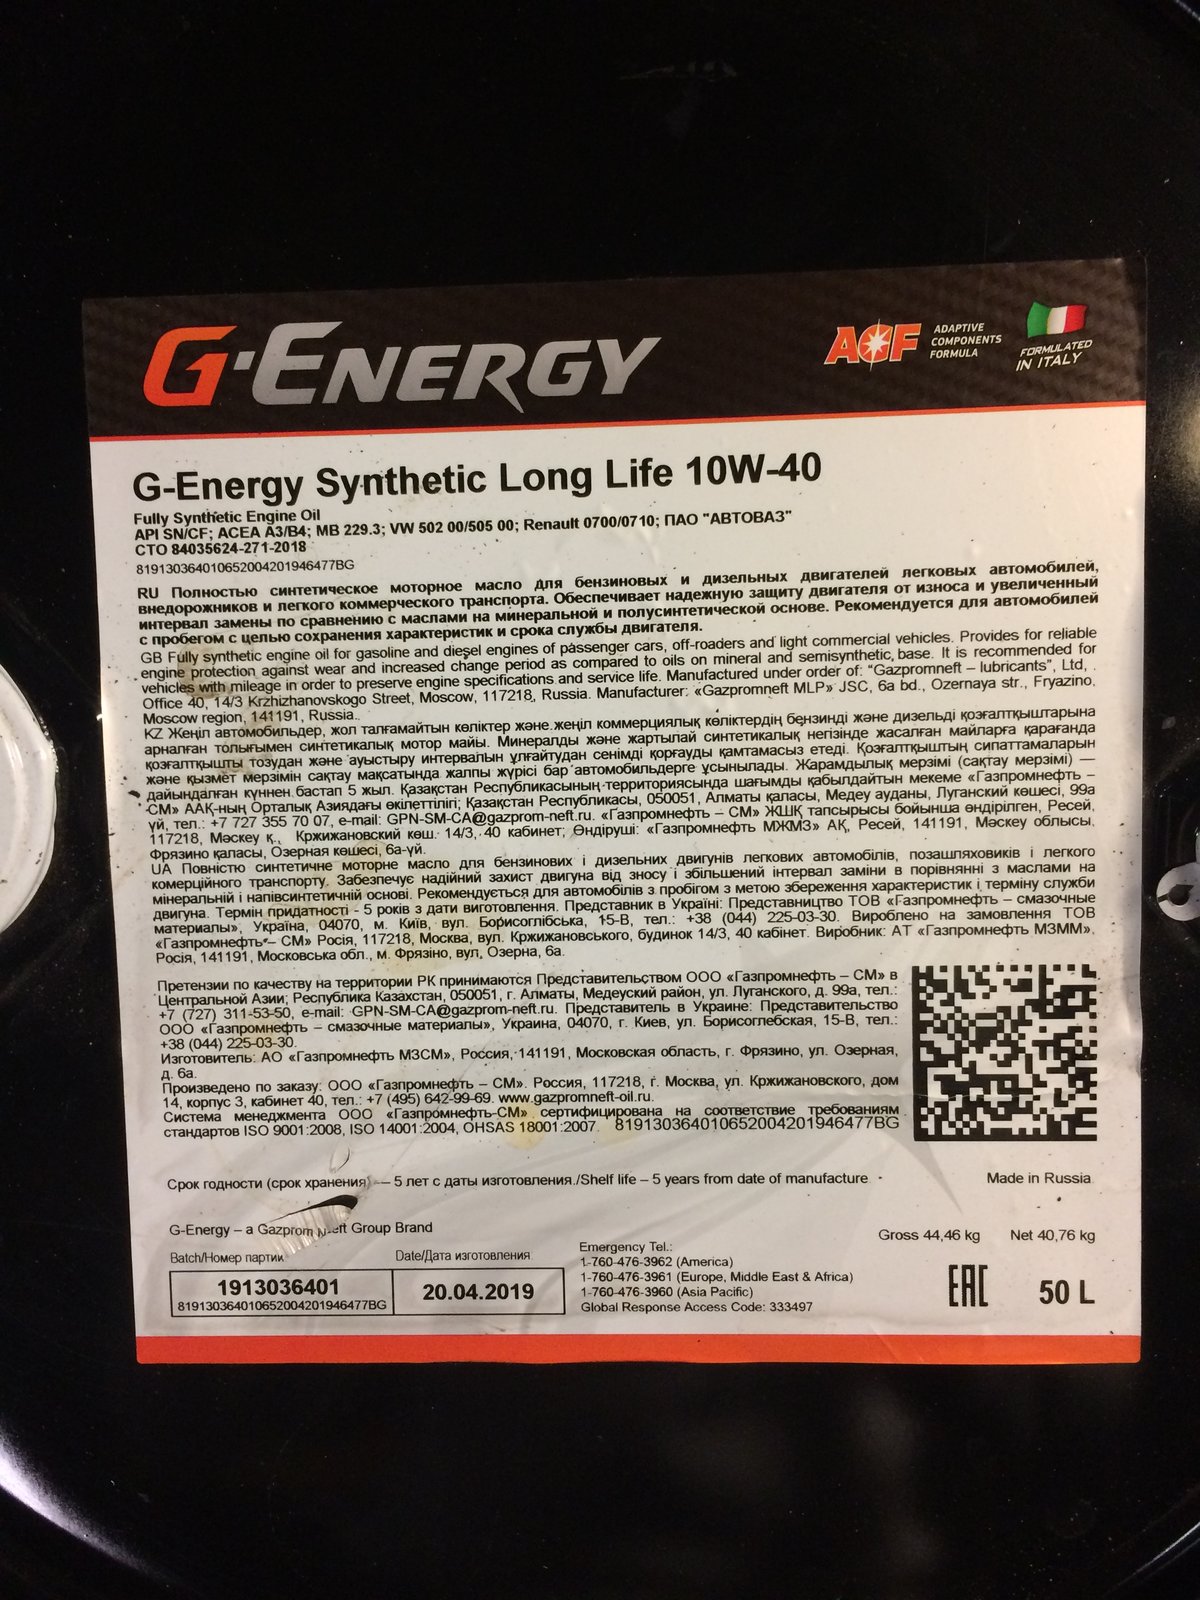 Synthetic long life 10w 40. G Energy 10w 40 long Life. G Energy Synthetic 10w 40 long Life 1l. G-Energy Synthetic long Life 10w-40 API SN/CF, ACEA a3/b4 (205 л). G Energy 10w 40 Full Synthetic.